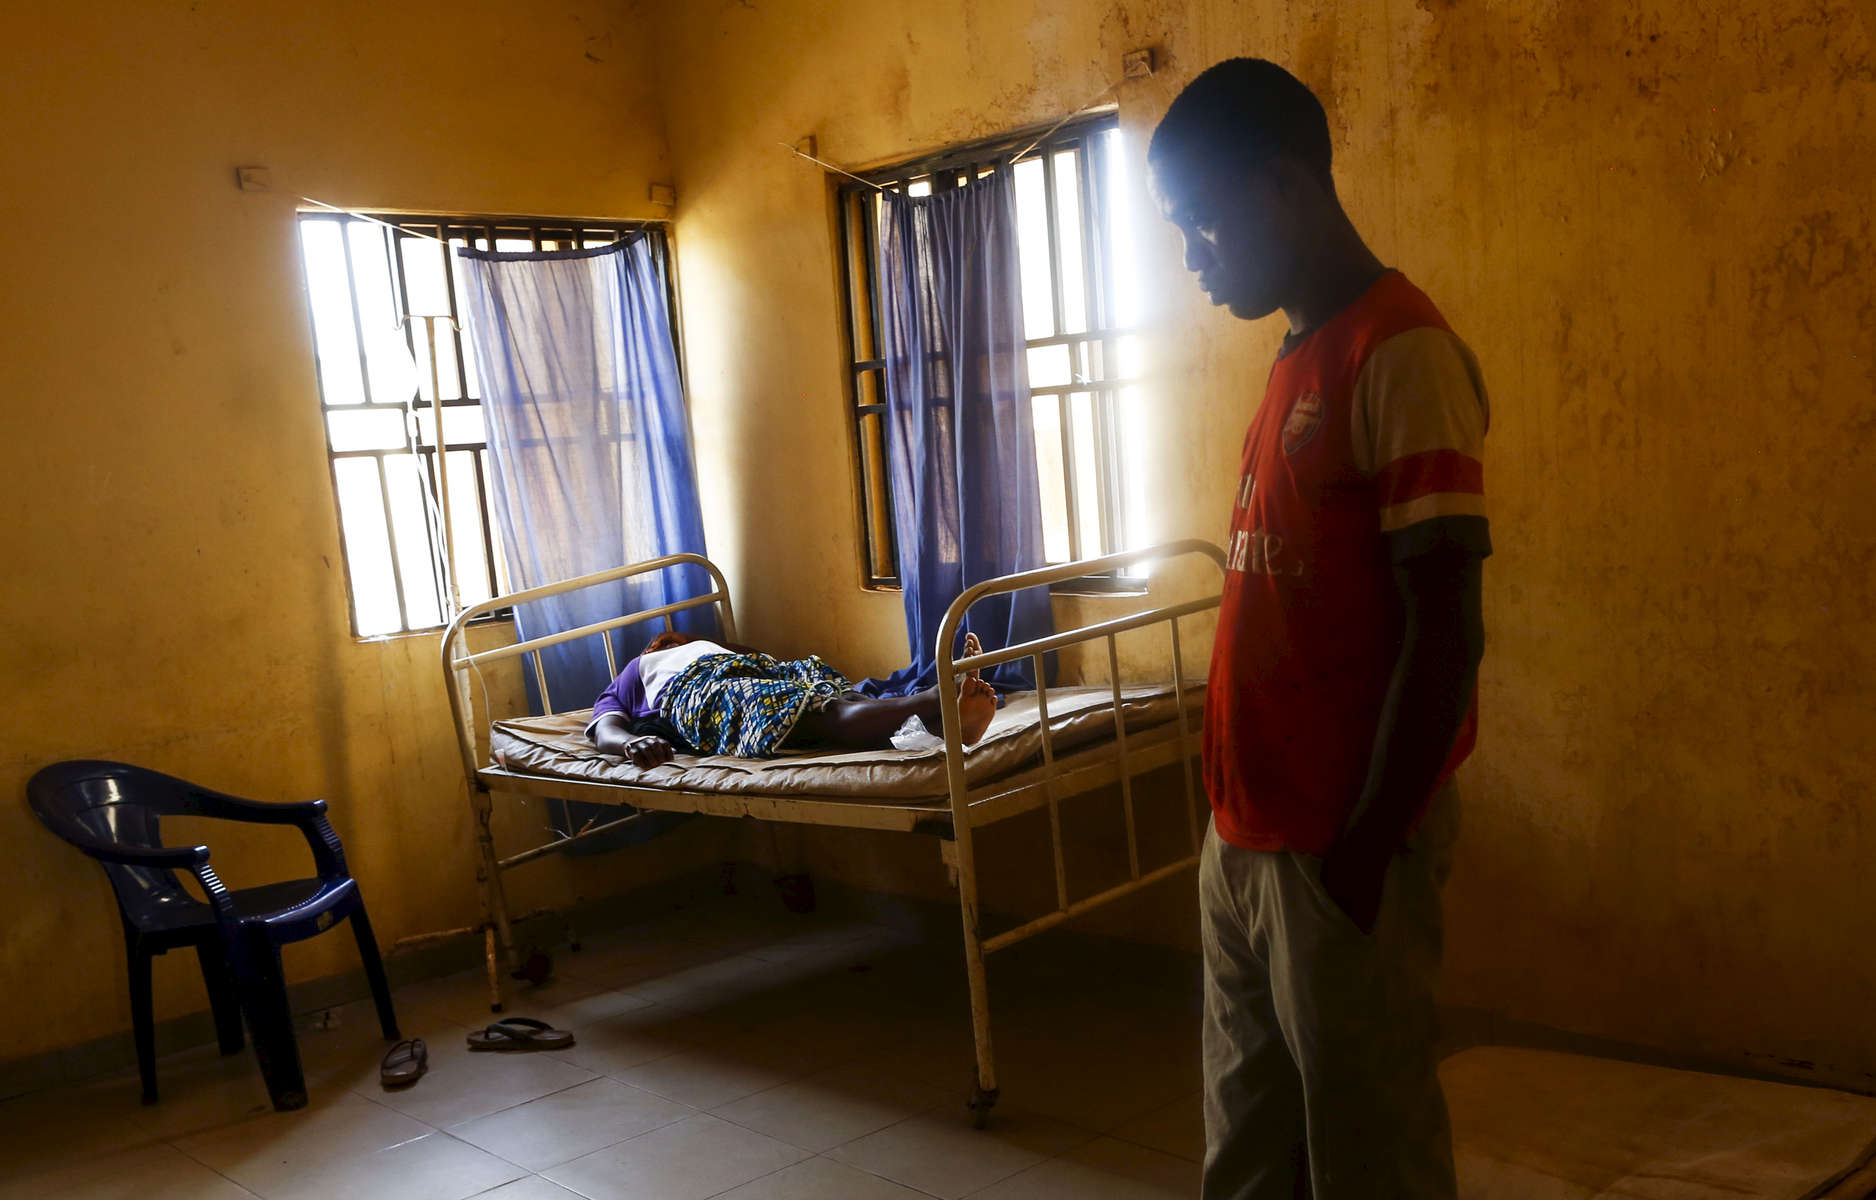 A pregnant woman rest on a bed as she is having bleeding while her husband reflects at the medical facility of Kuchigoro in Abuja, Nigeria.